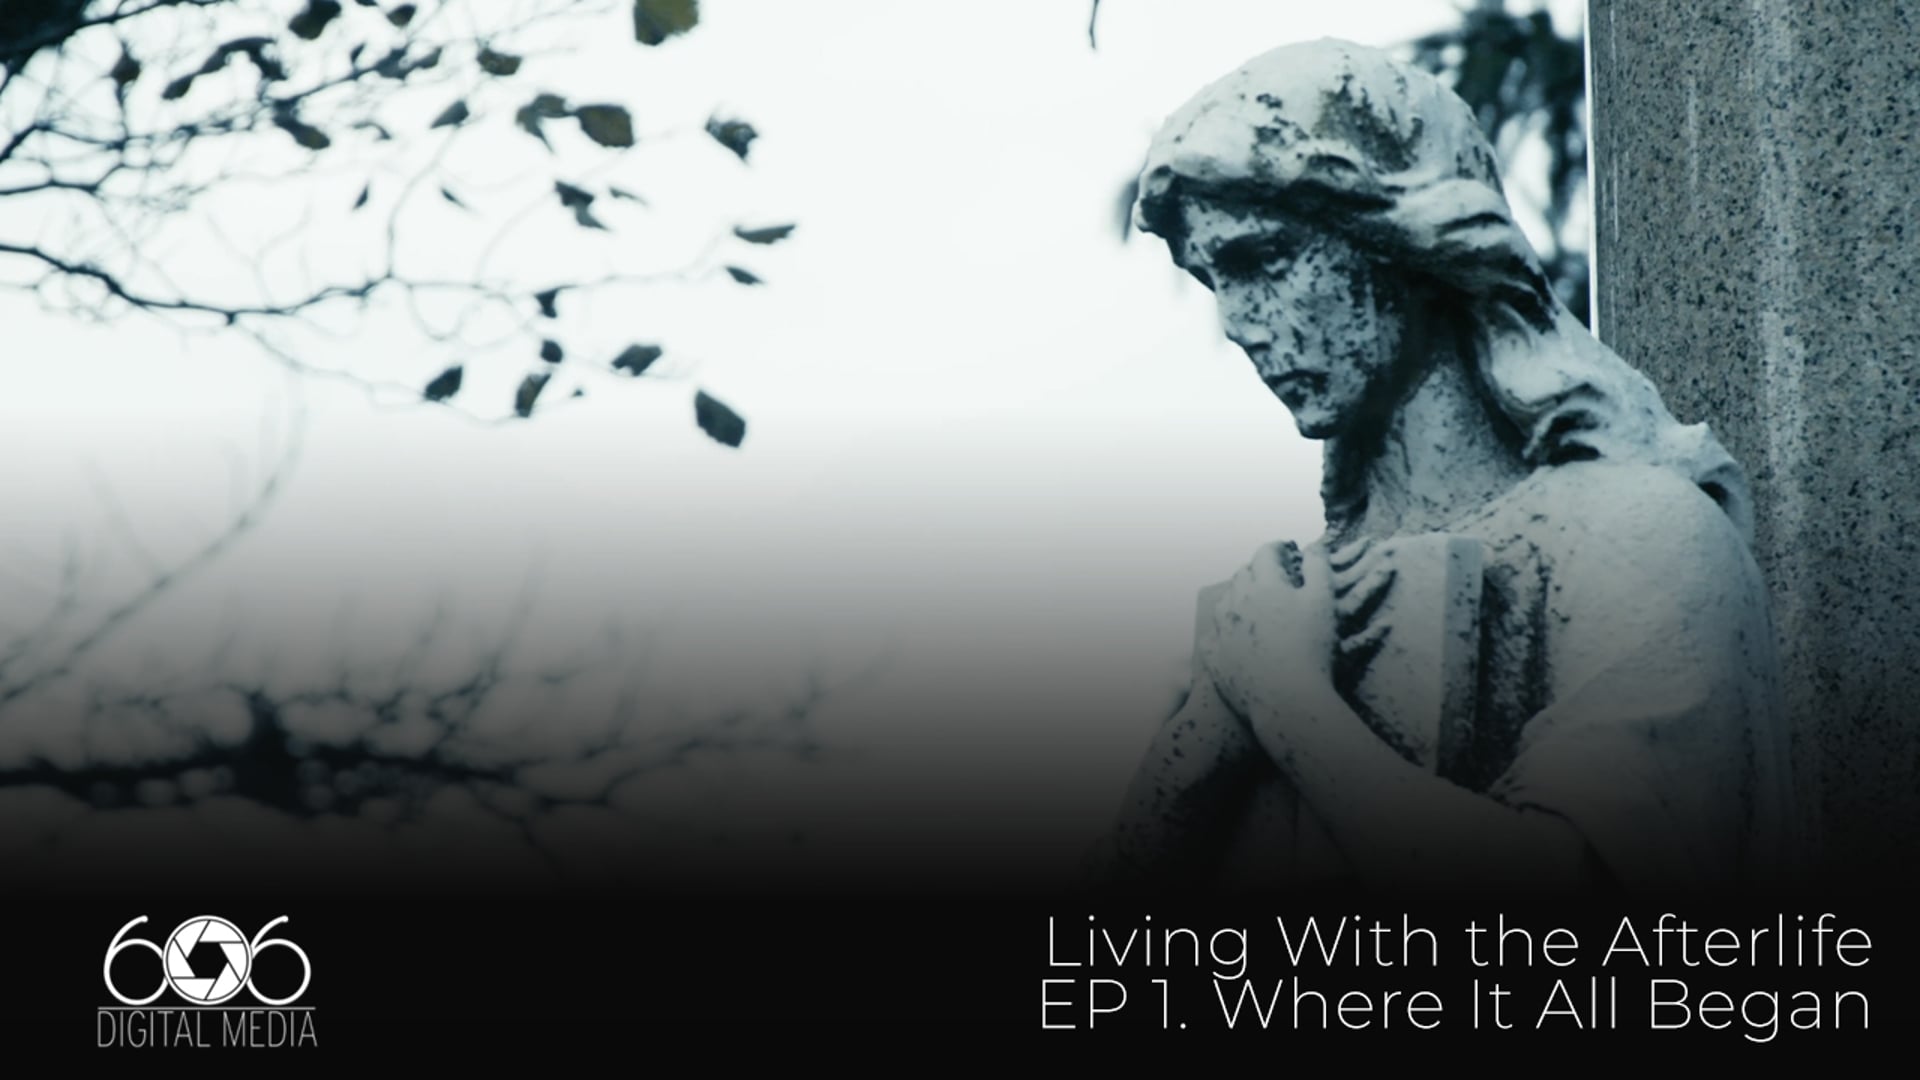 Living With The Afterlife EP 1. Where It All Began